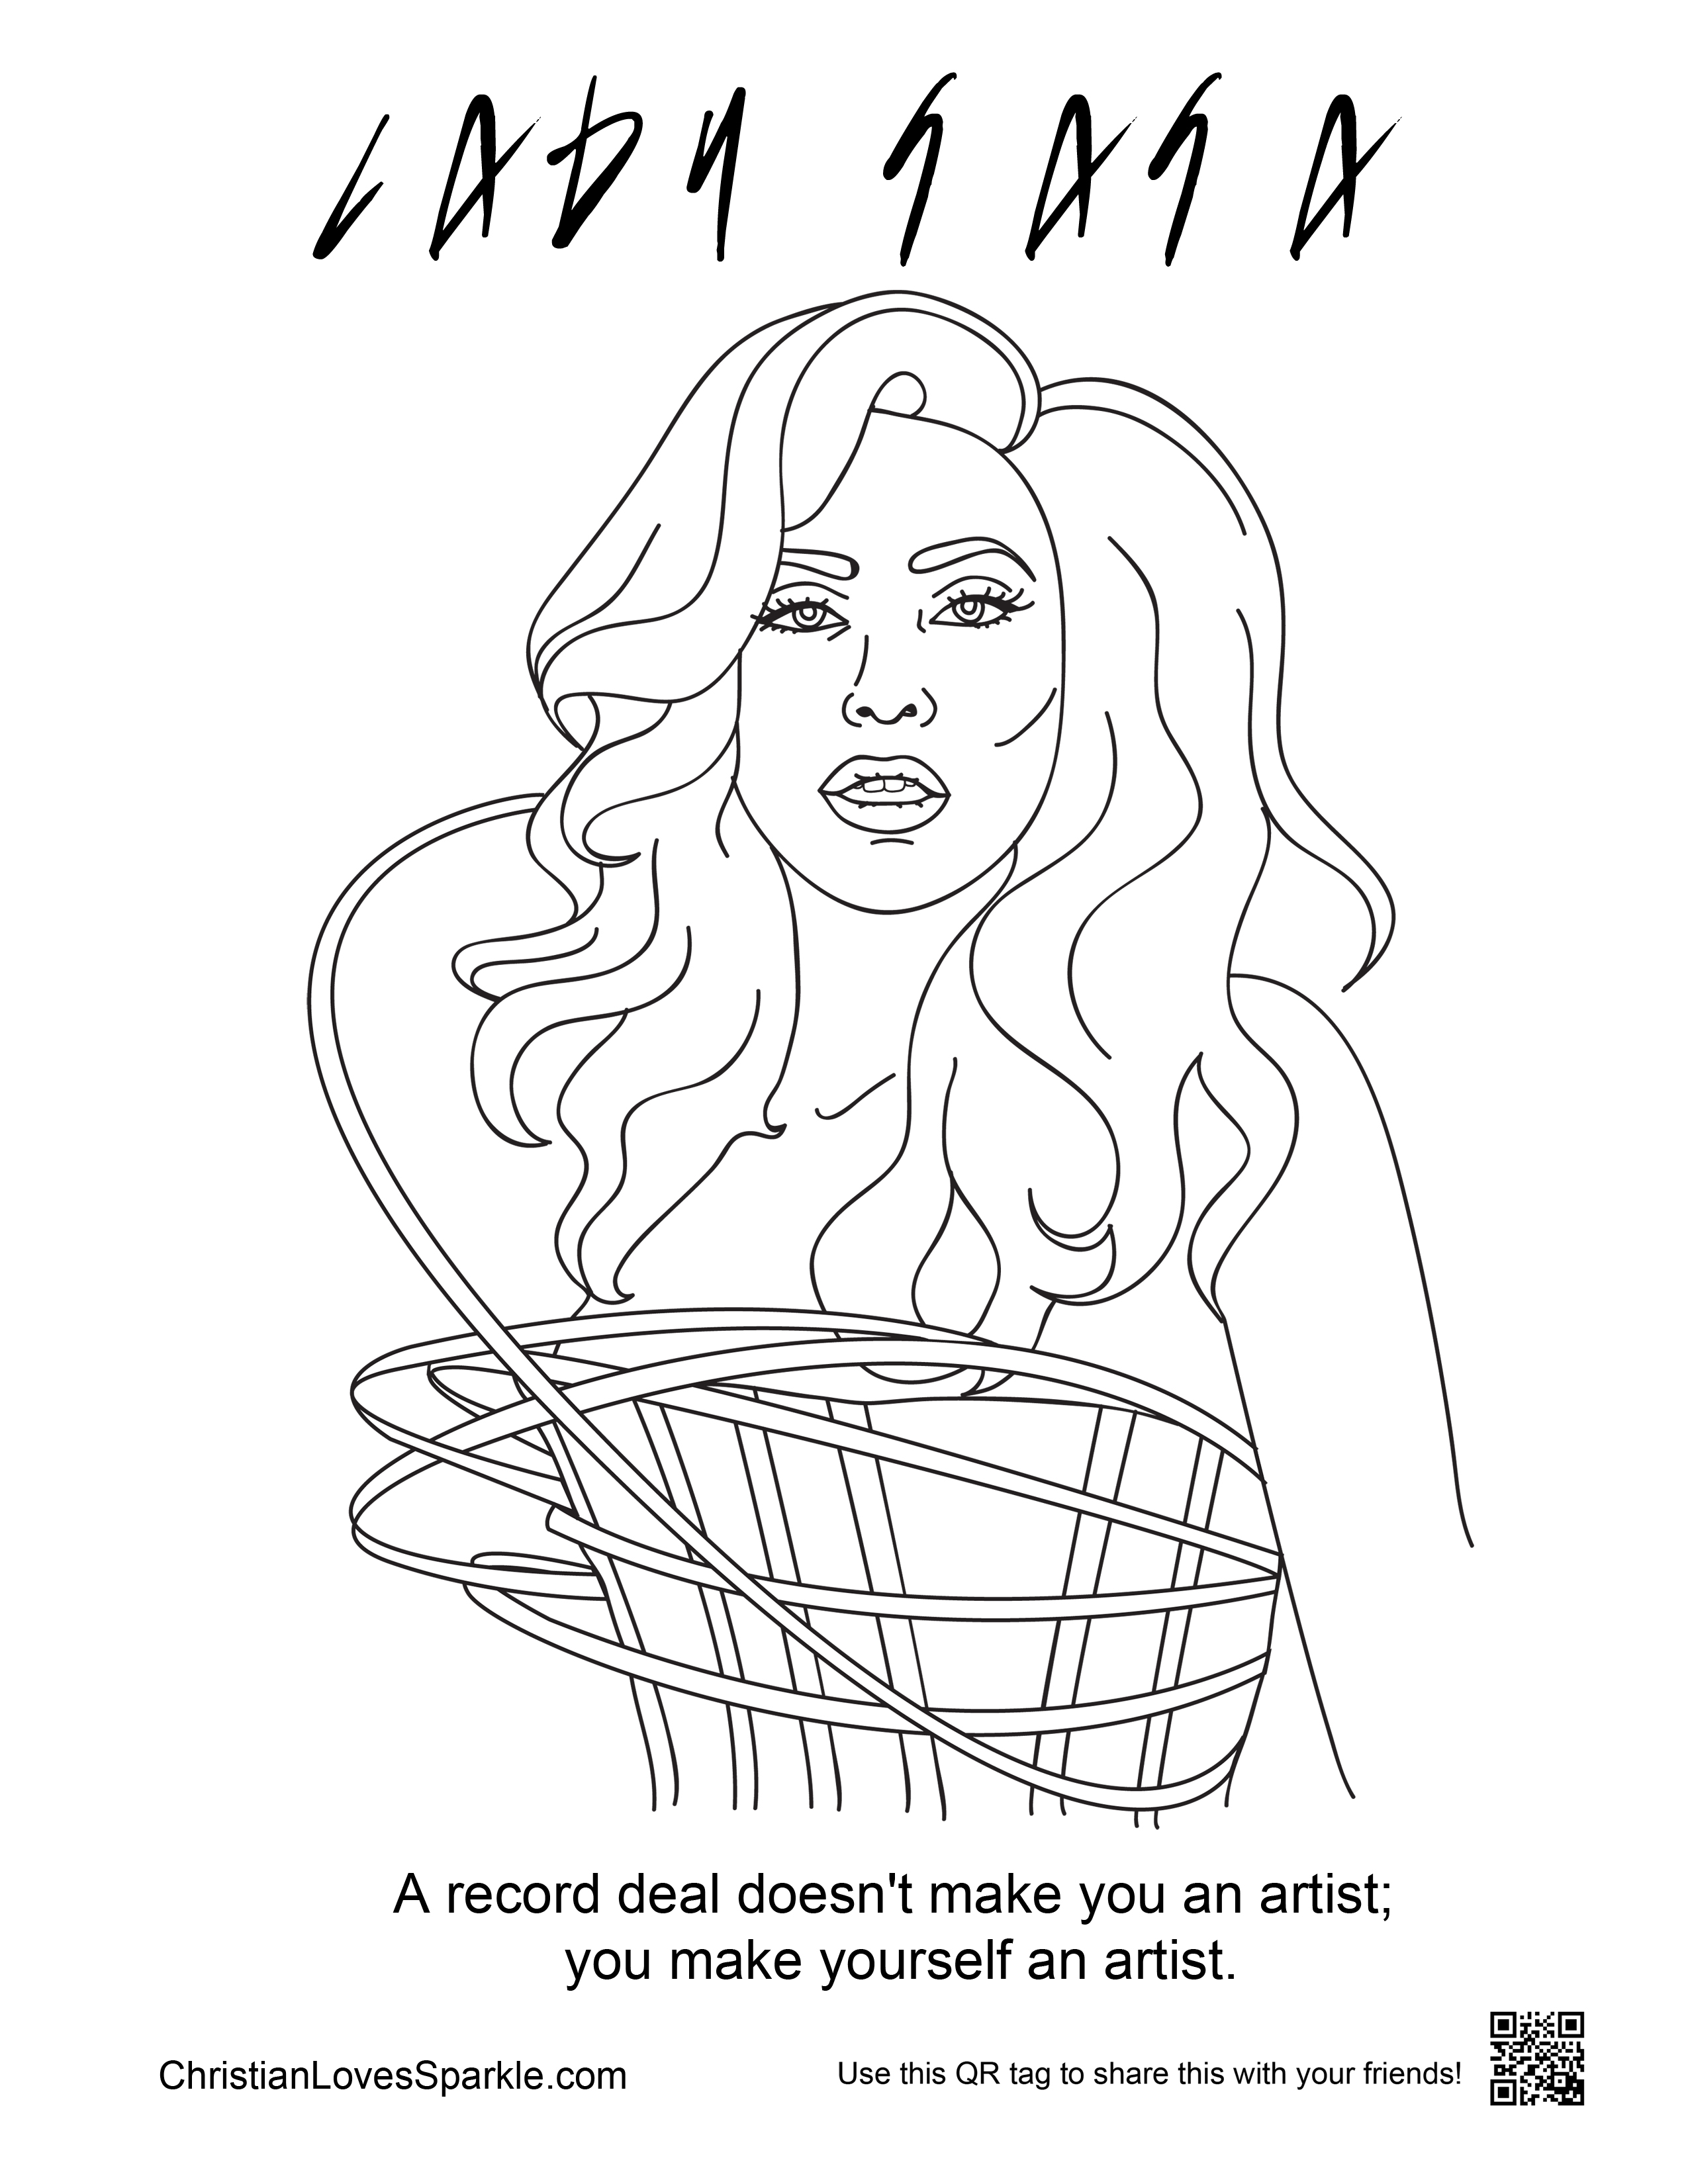  Lady Gaga Coloring Pages – best coloring page – Lady Gaga